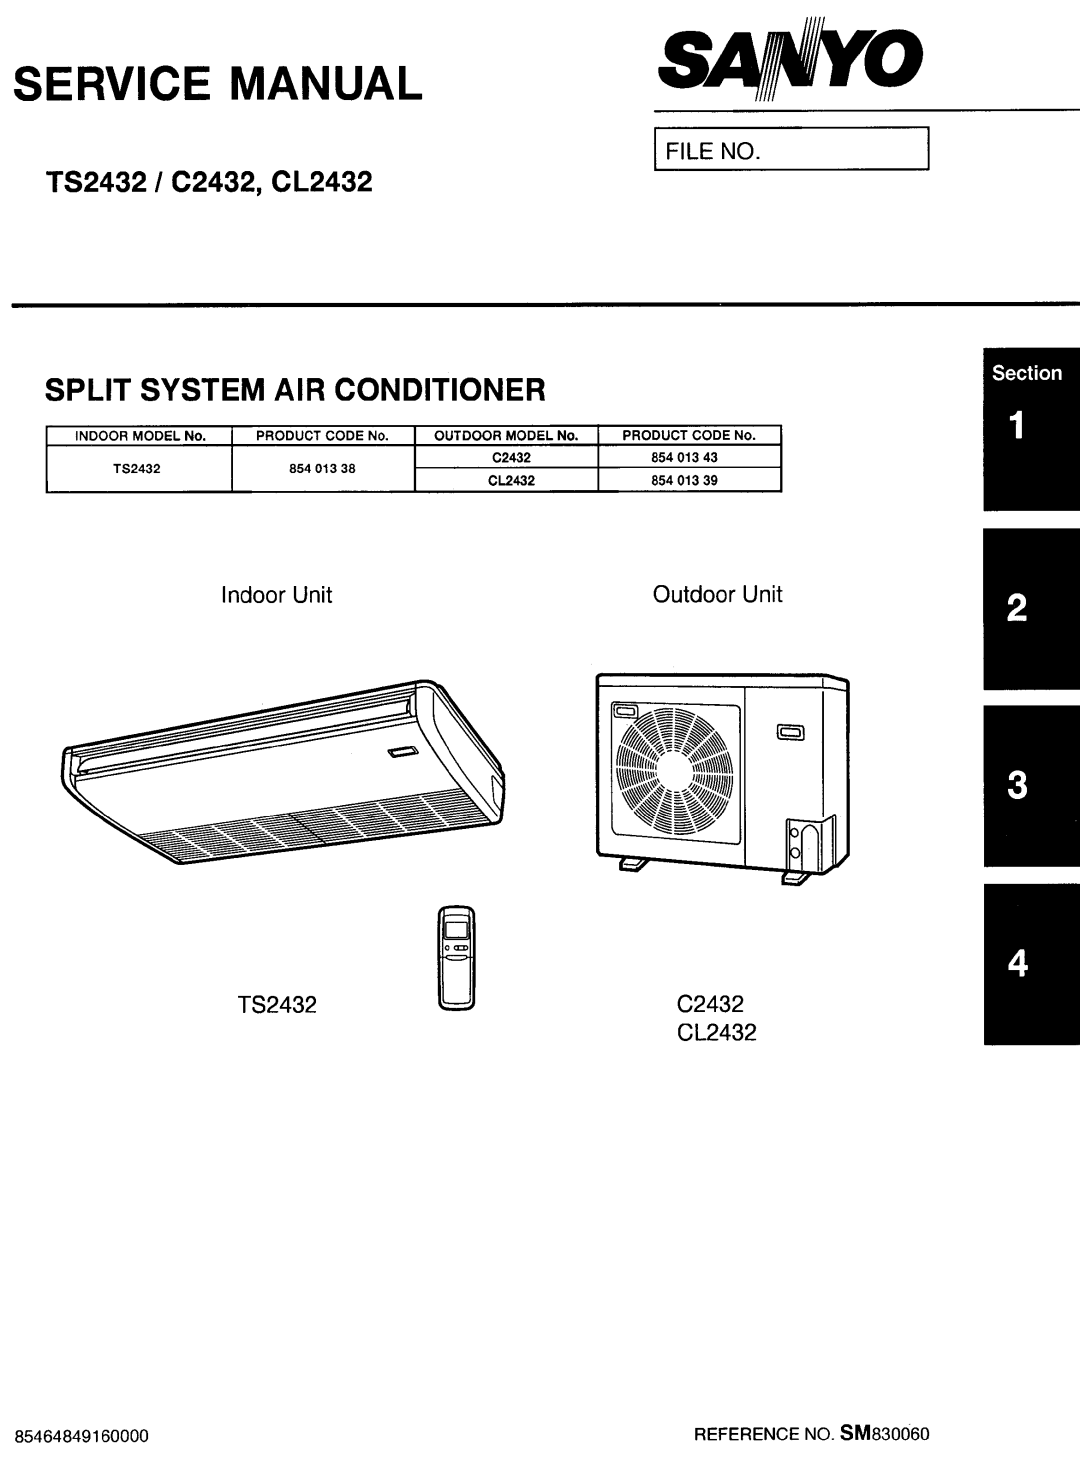 Sanyo installation instructions Contents, Use this manual when installing combined, unit C2432 or CL2432 only 